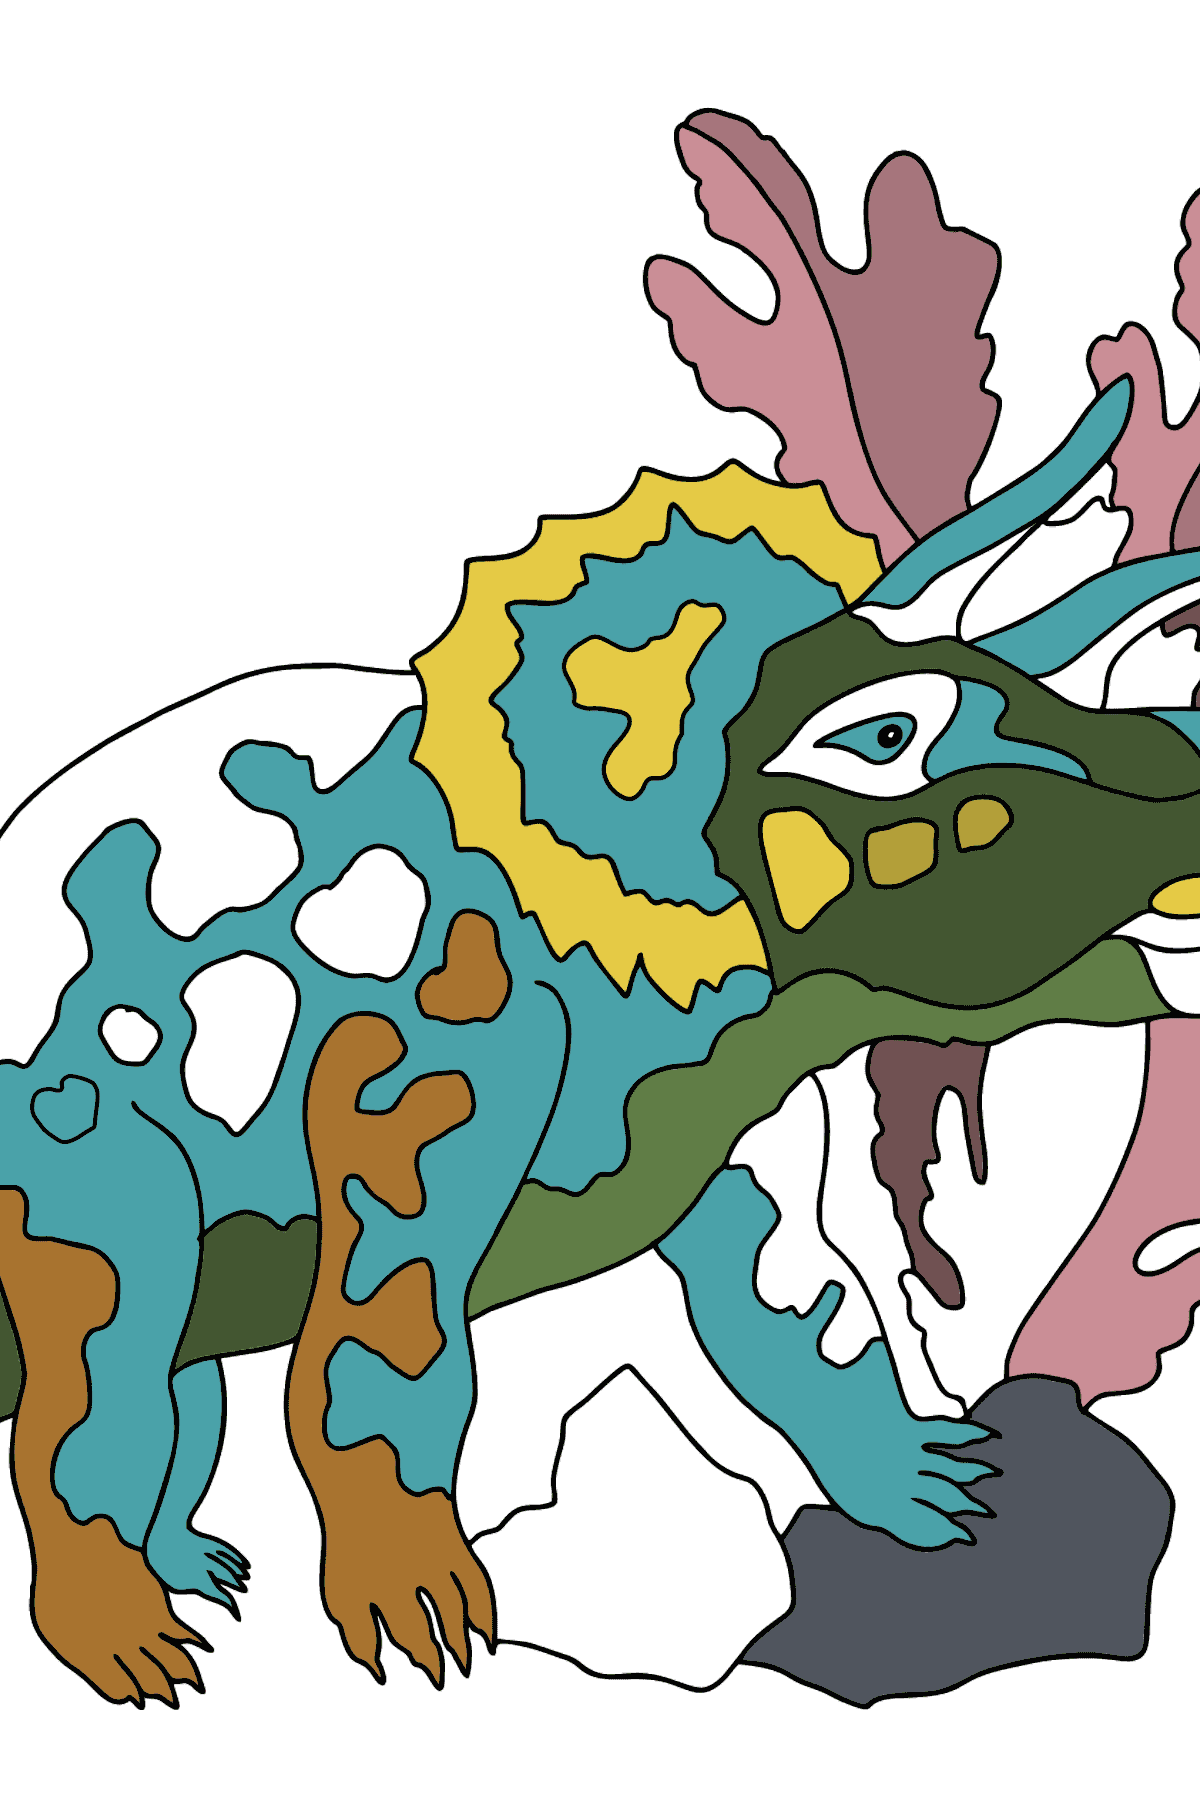 Coloring Page - Triceratops - A Grass-Eating Dinosaur - Coloring Pages for Kids